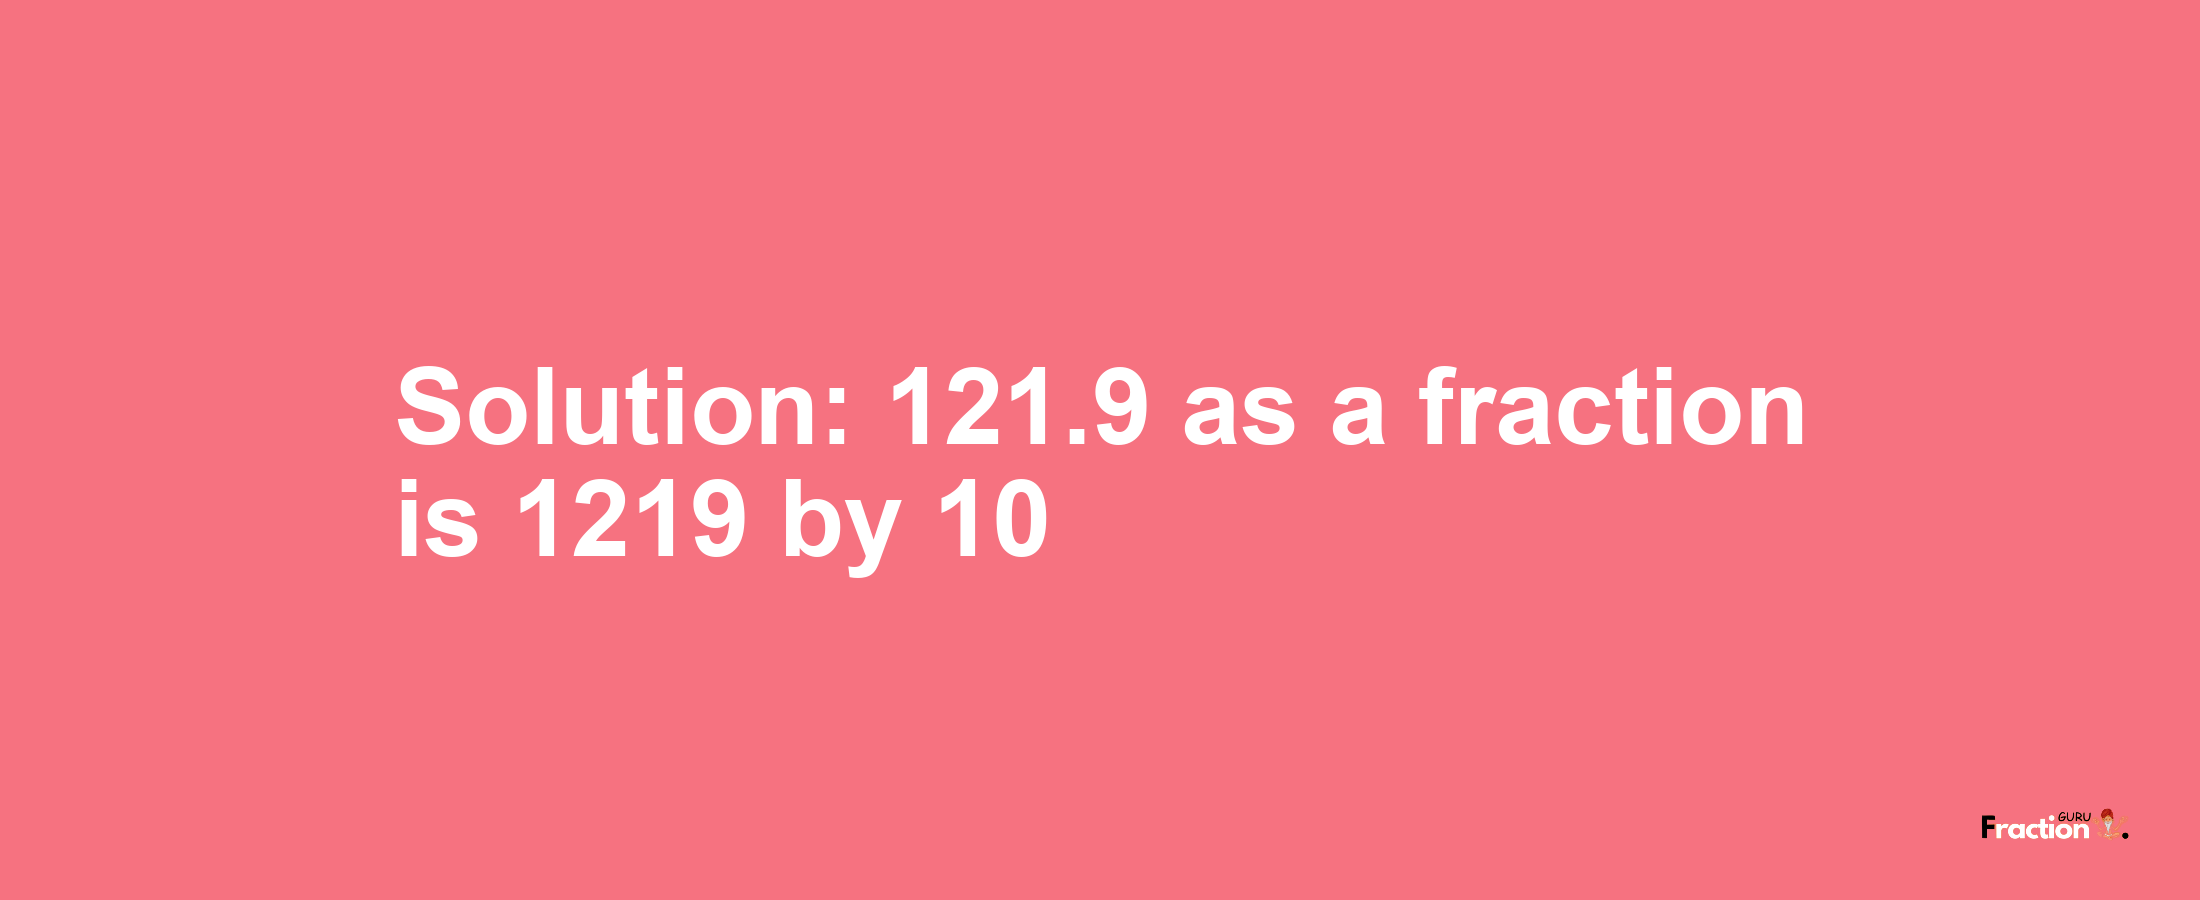 Solution:121.9 as a fraction is 1219/10